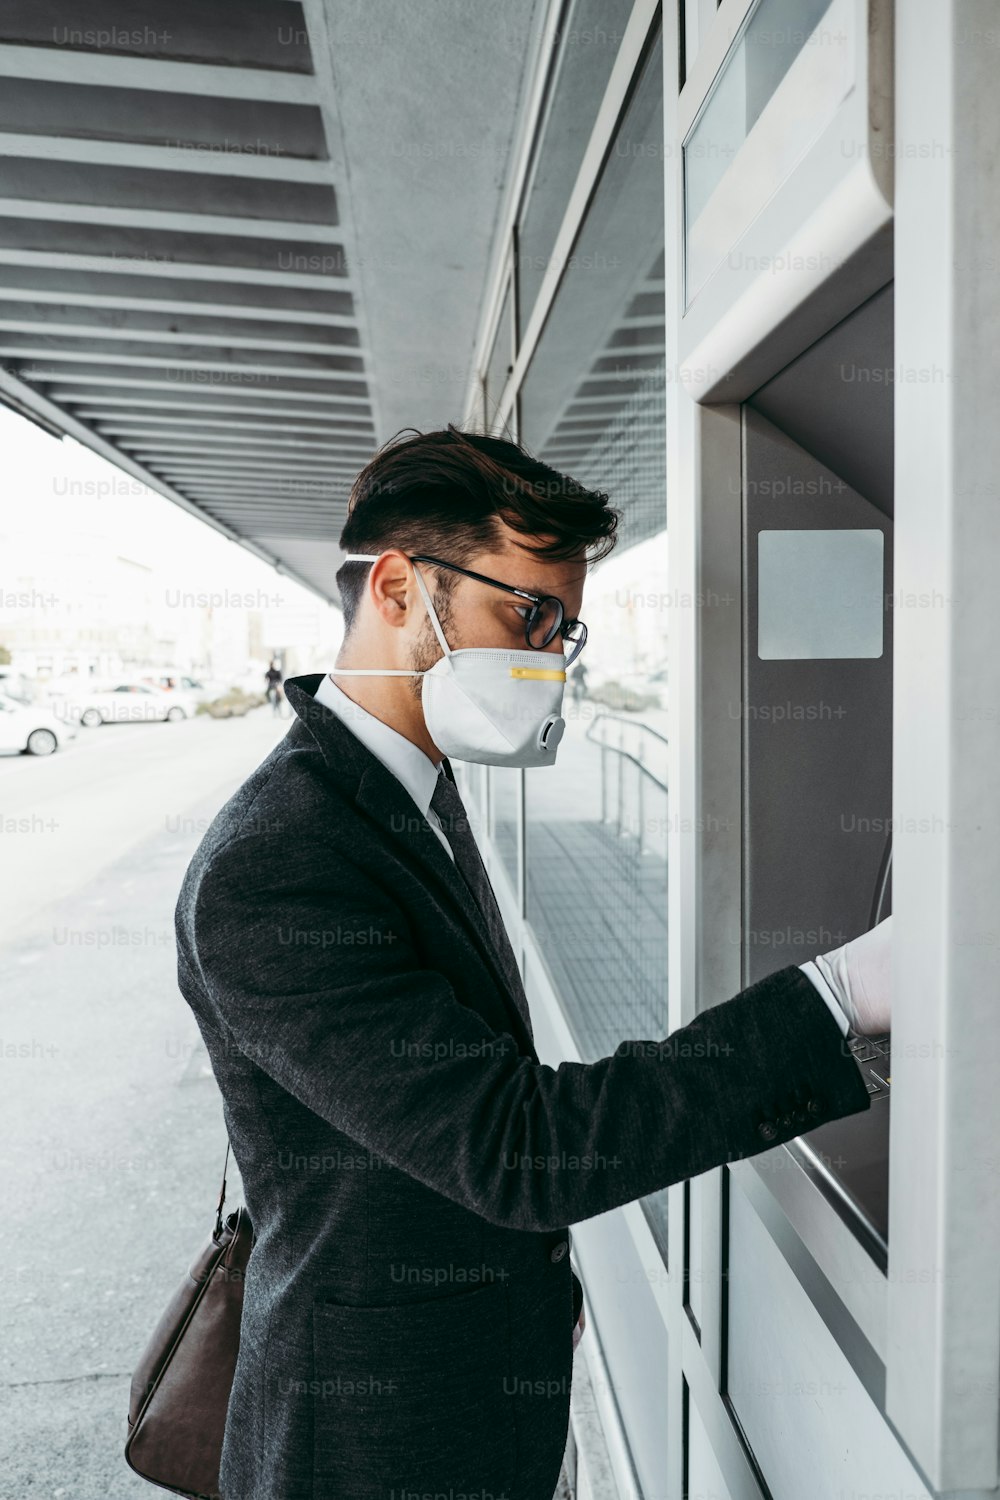 Business man with protective face mask and gloves using street ATM machine. Virus pandemic or epidemic concept.